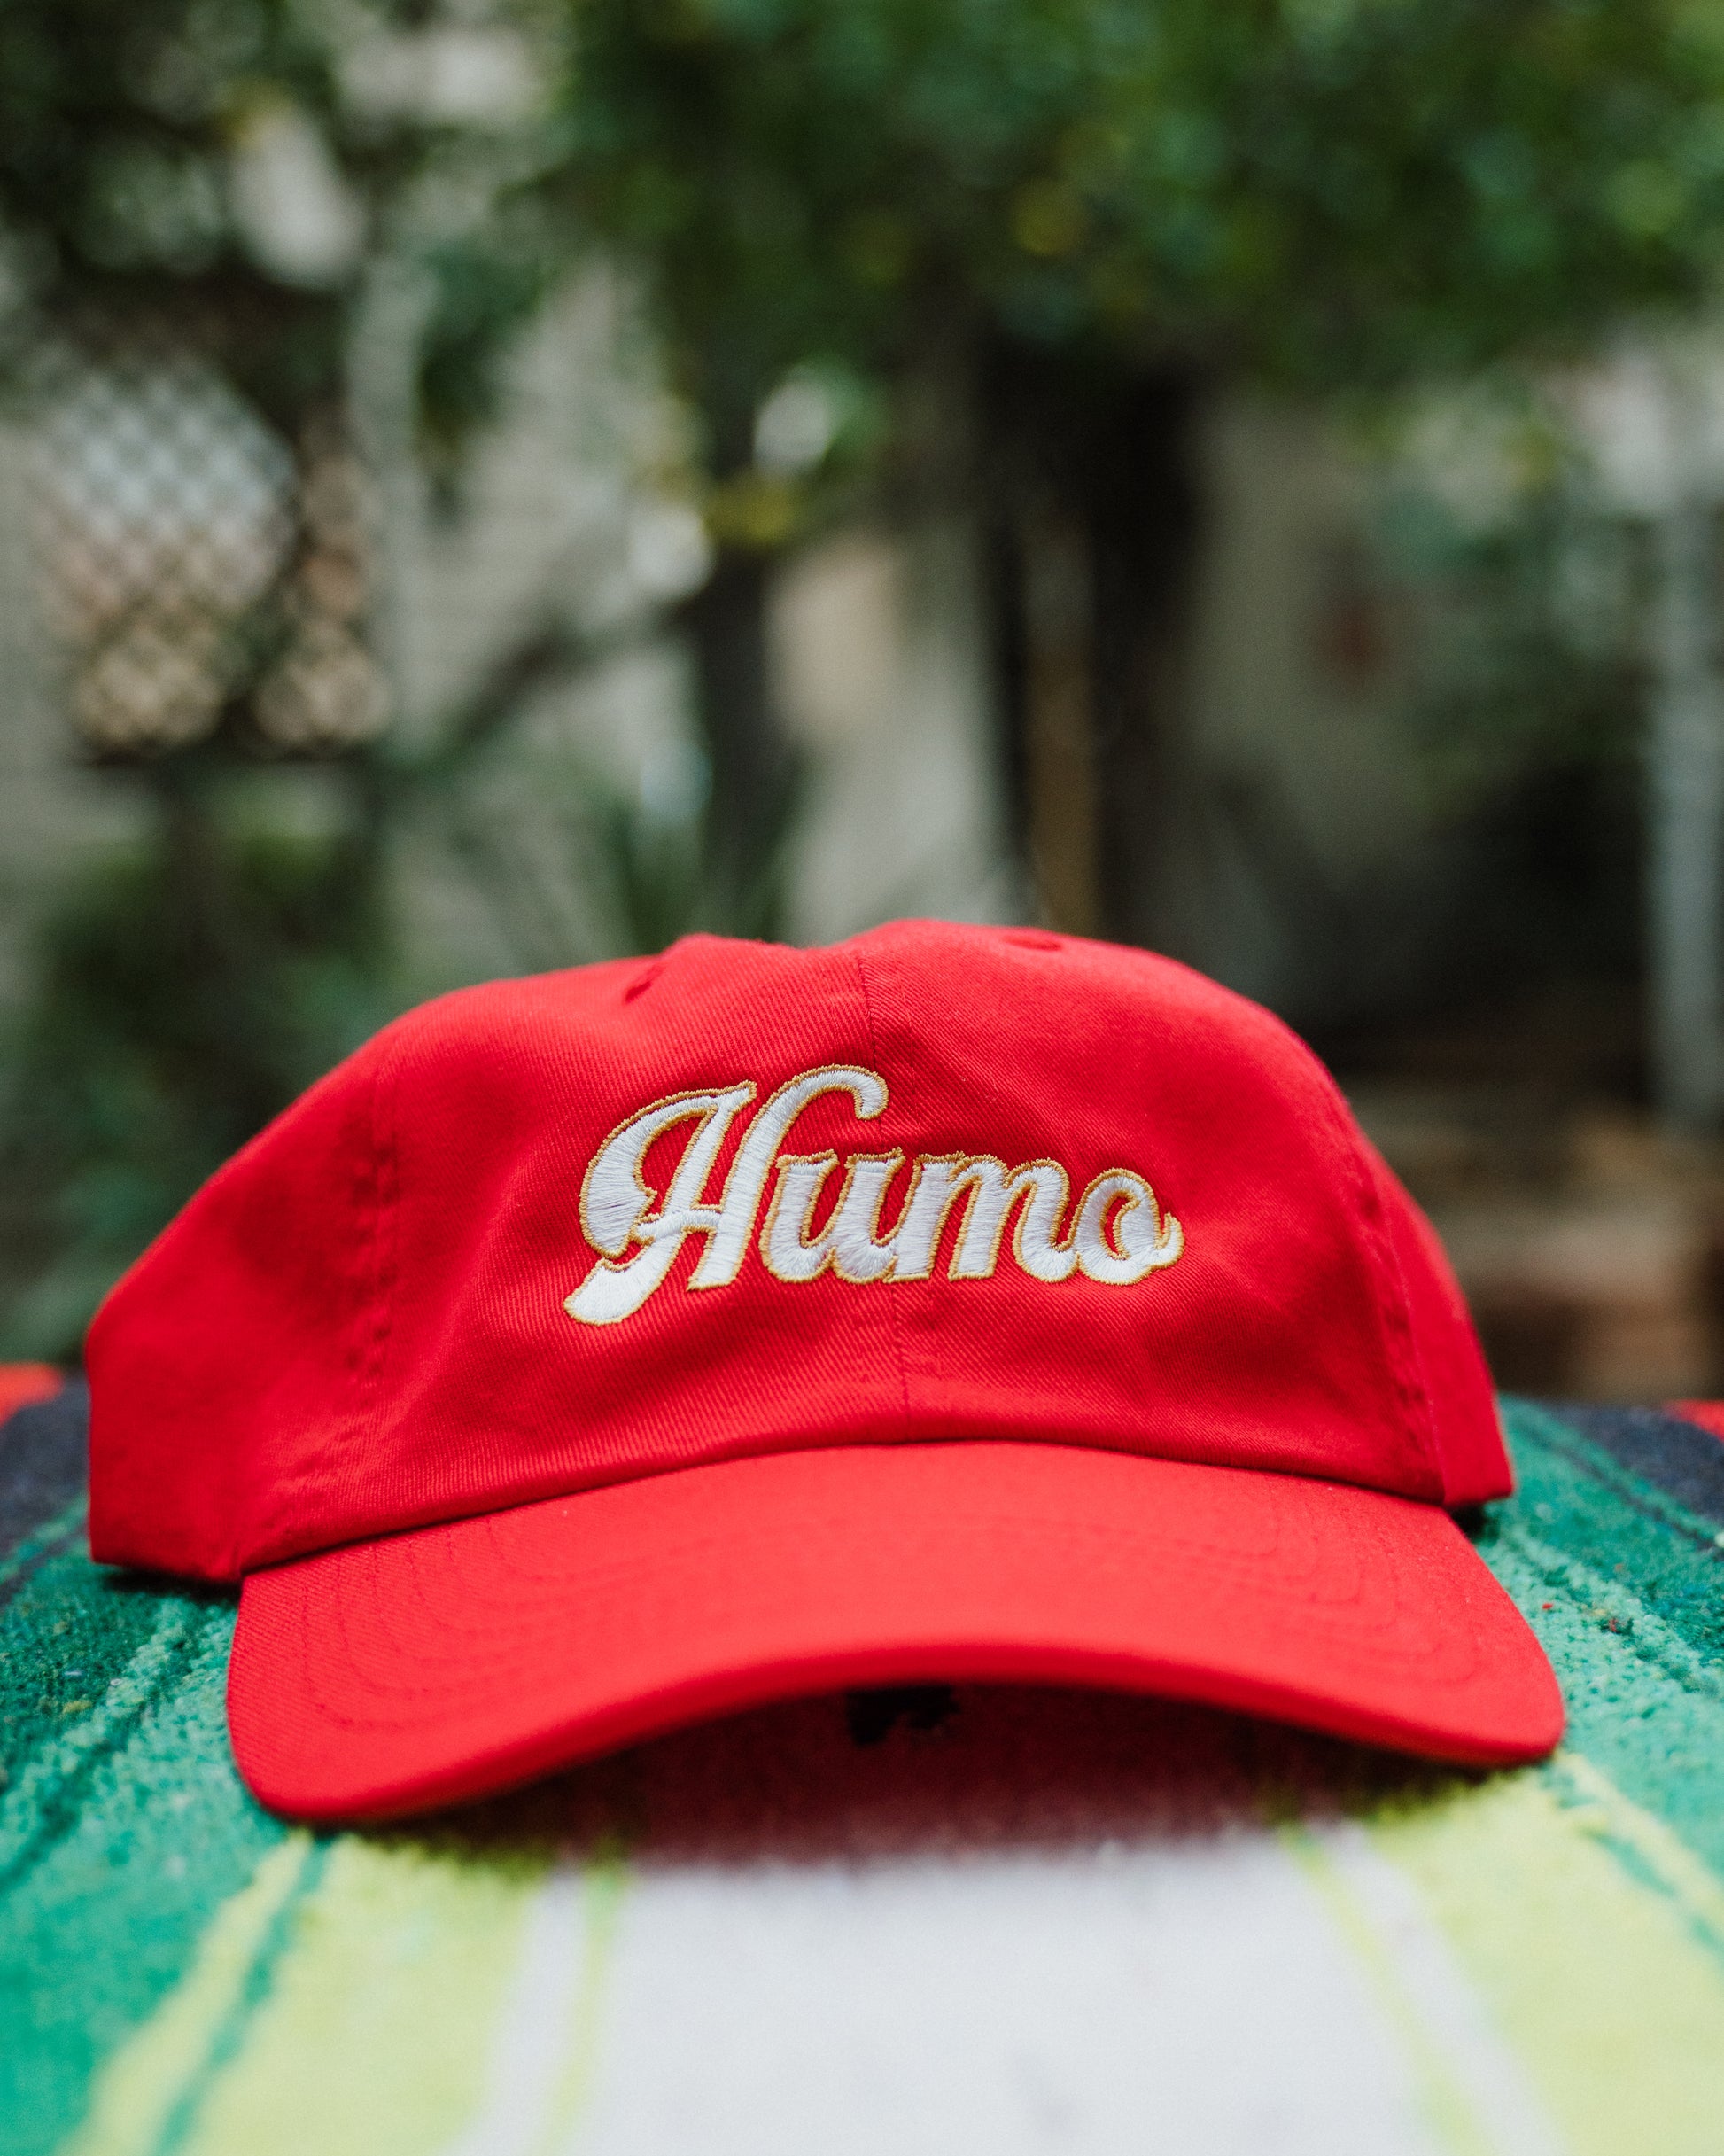 humo-red-dad-hat-close-up